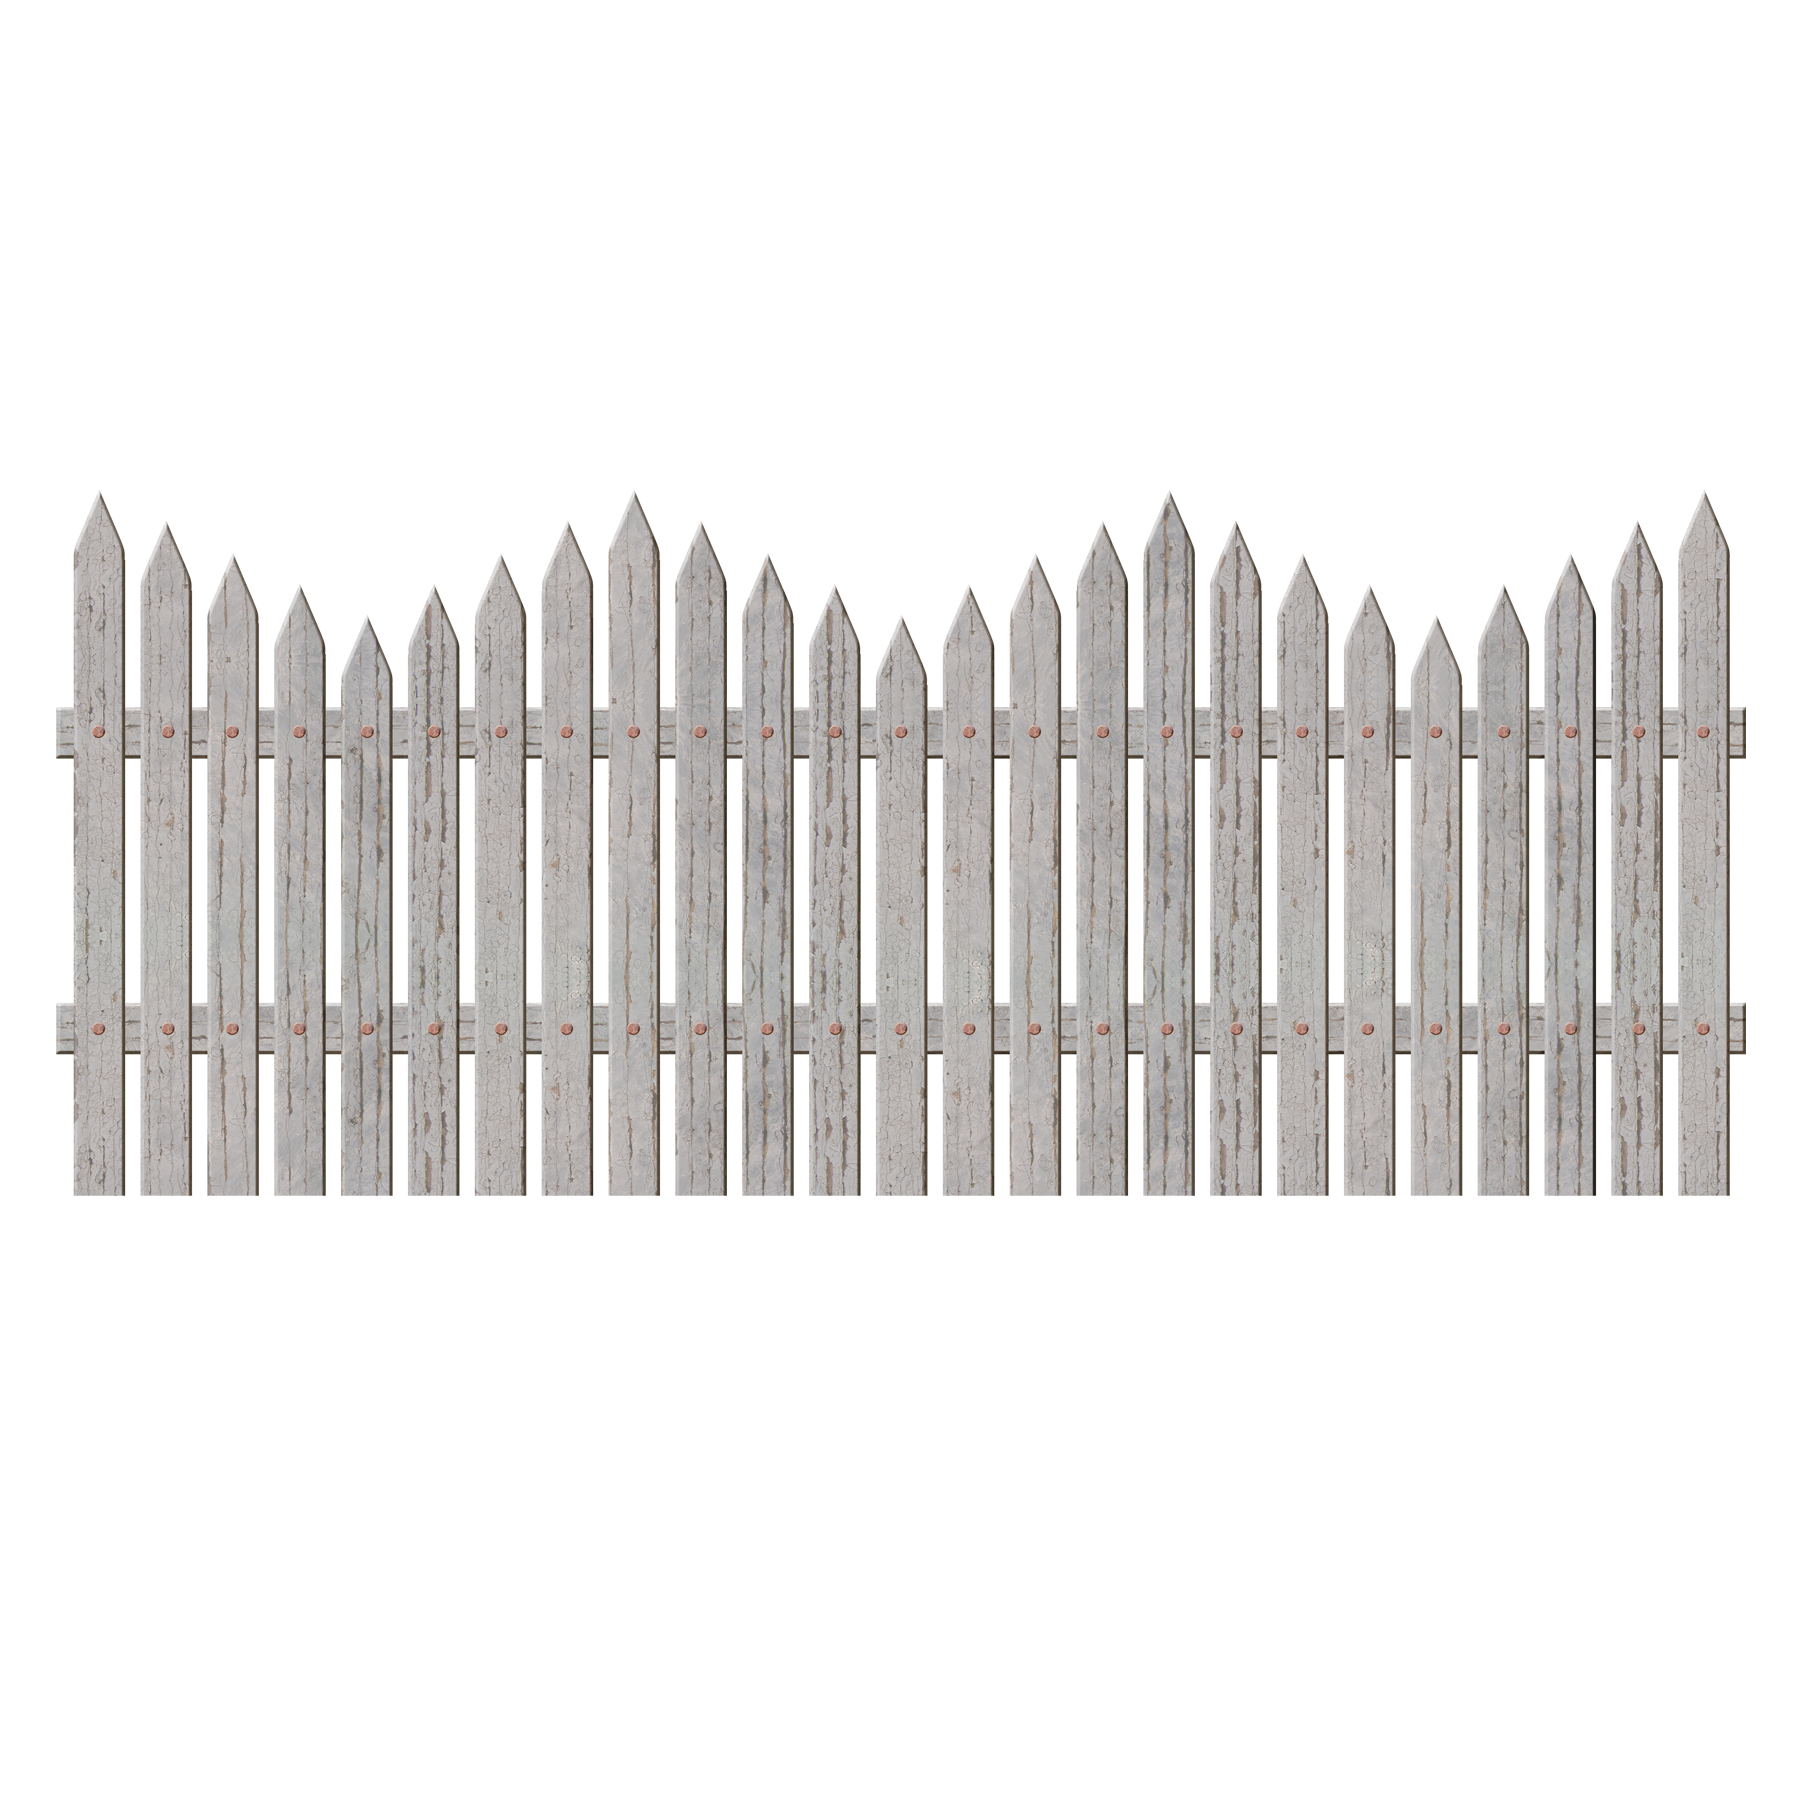 White Picket Fence Coloring Page